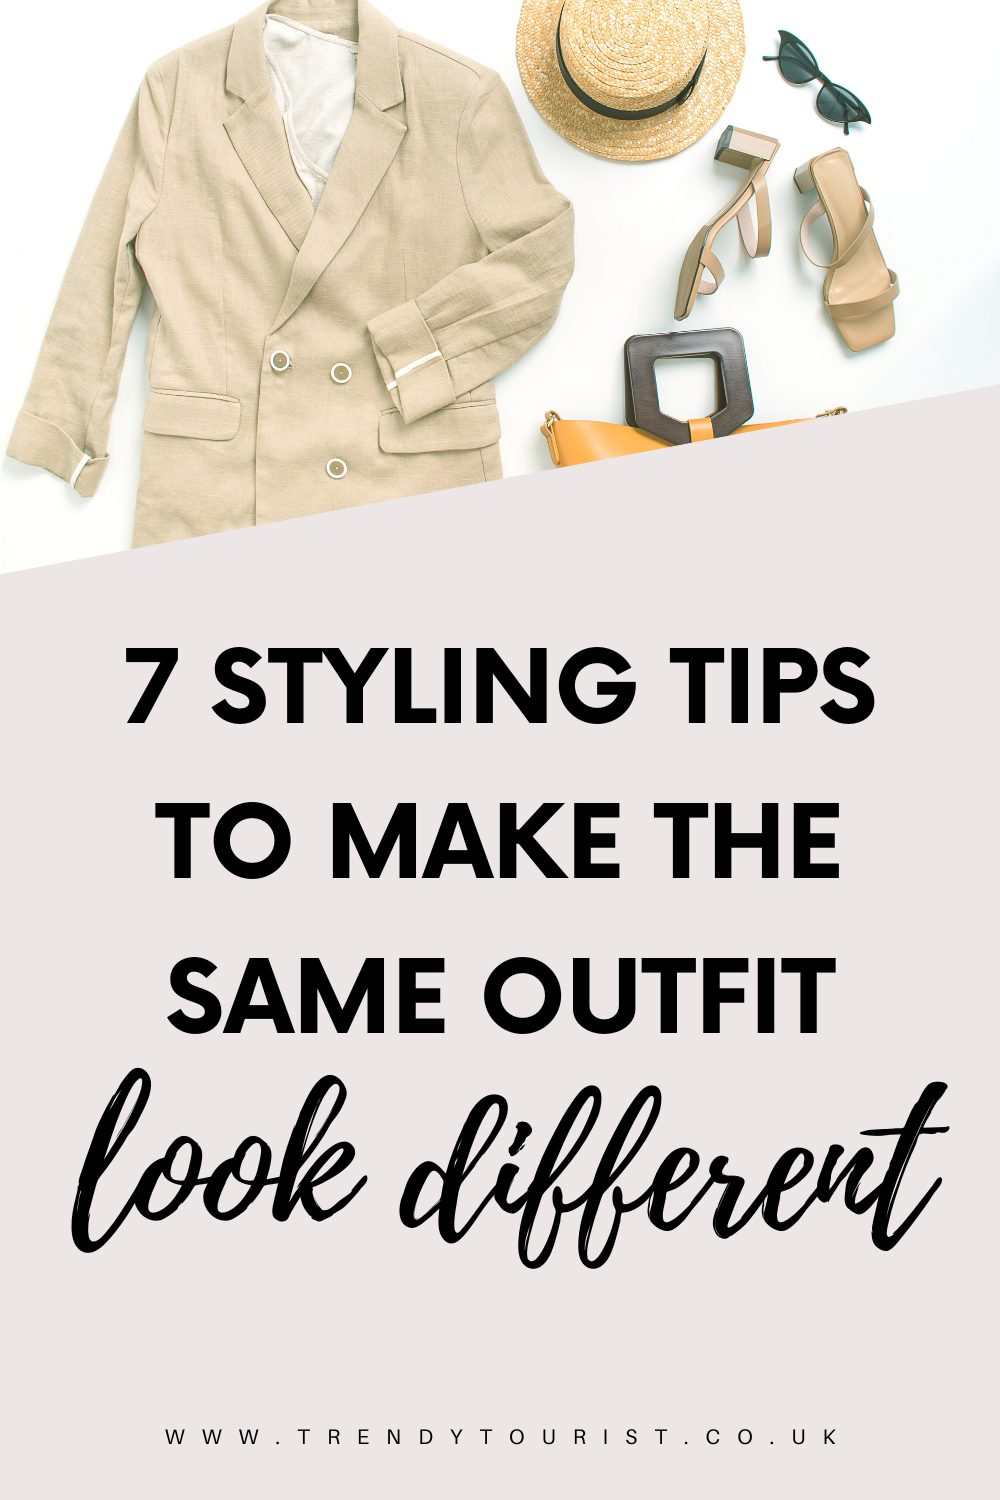 7 Styling Tips to Make the Same Outfit Look Different